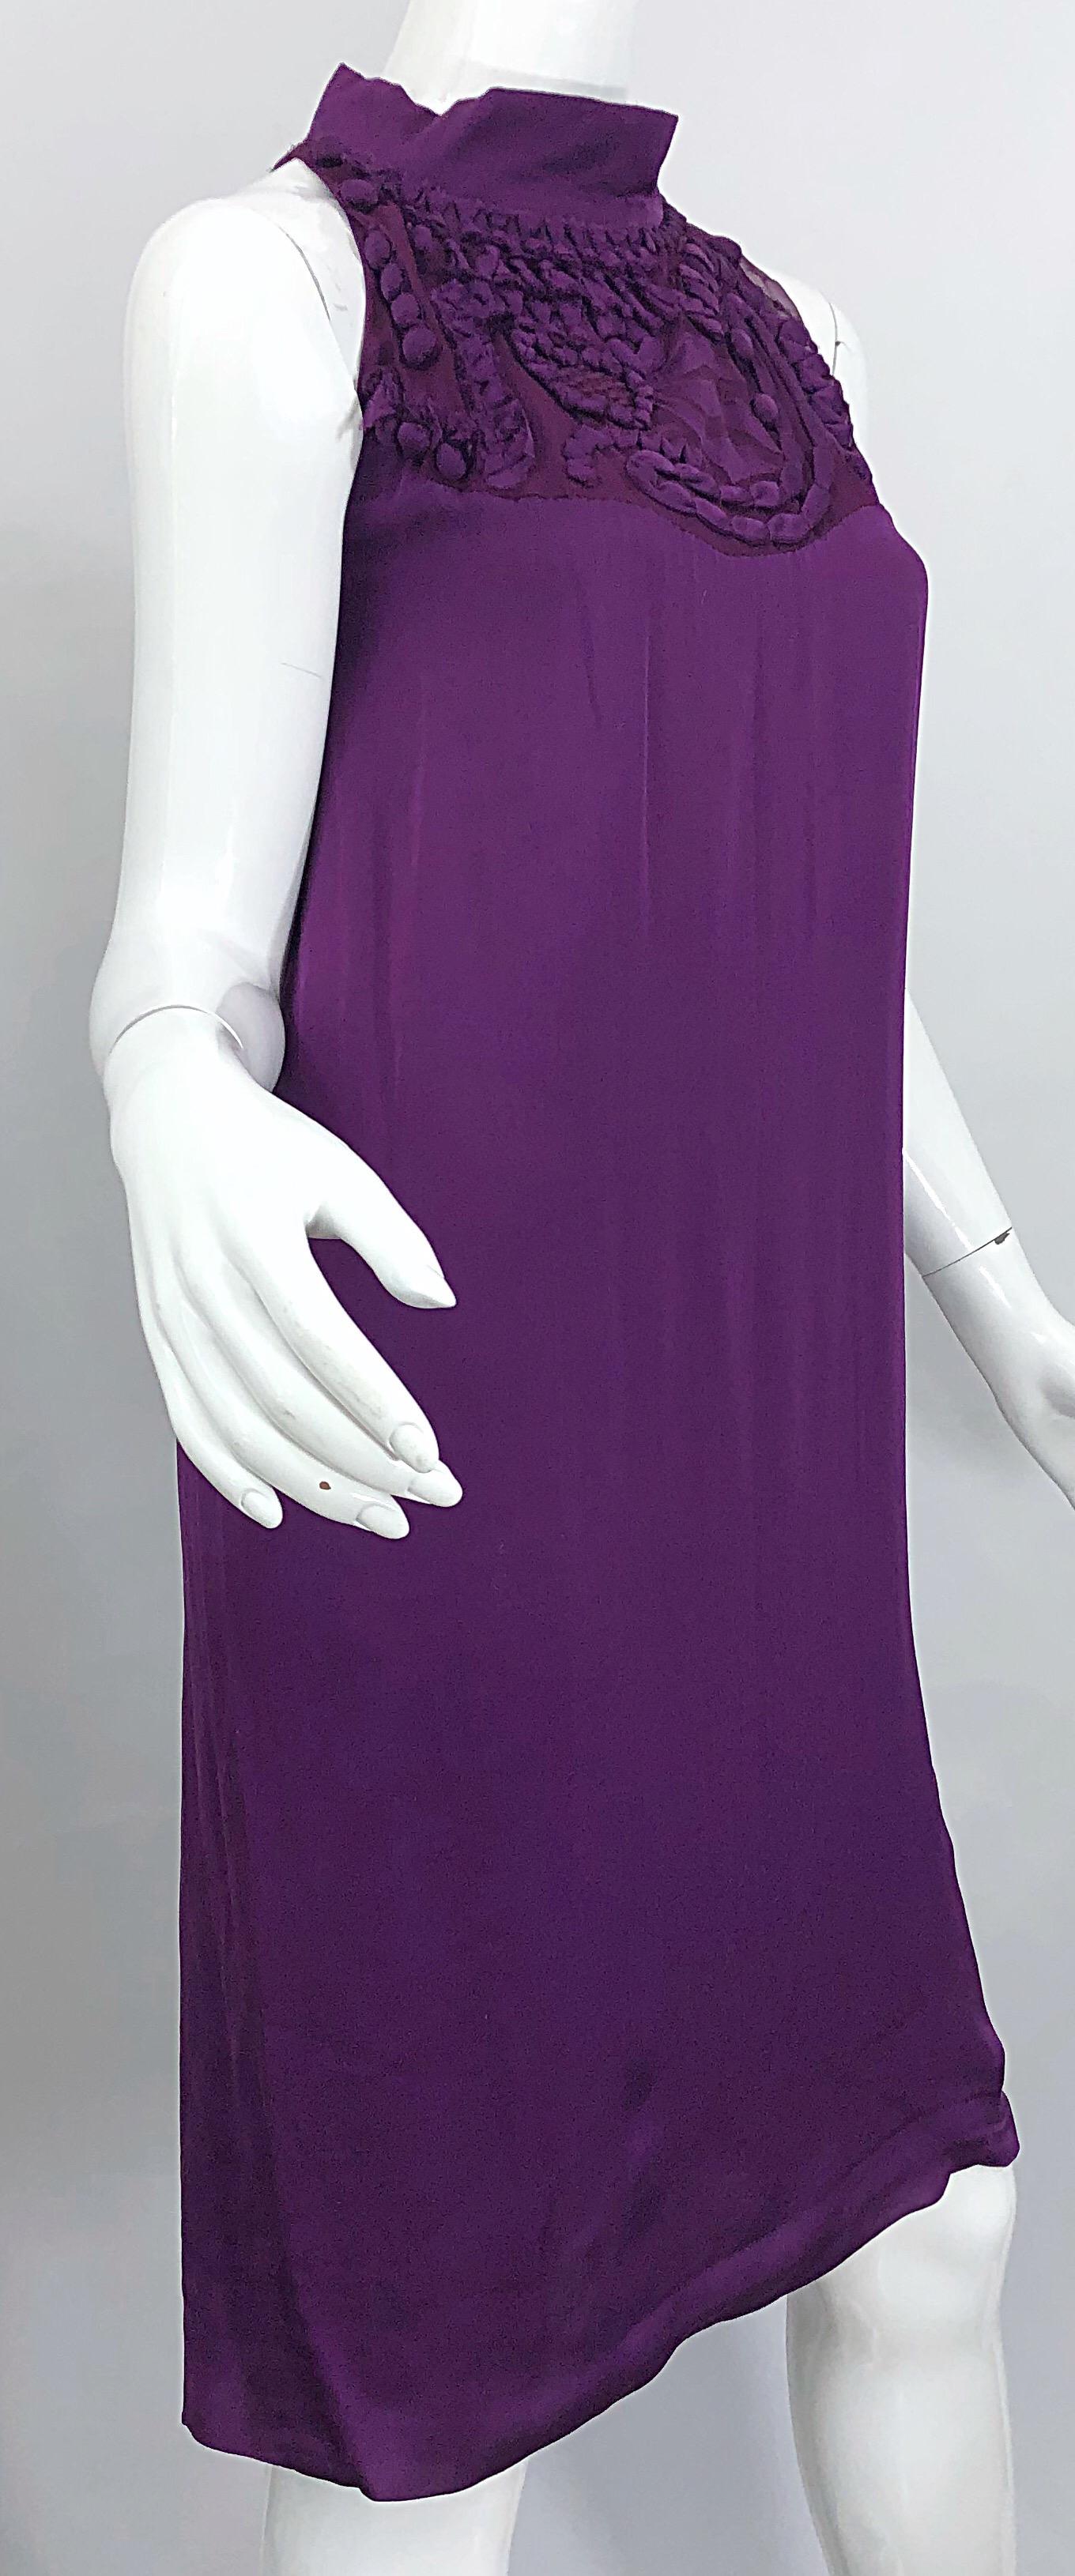 Yves Saint Laurent A / W 2007 Purple Silk Size 40 / US 8 YSL Rive Gauche Dress In Excellent Condition For Sale In San Diego, CA